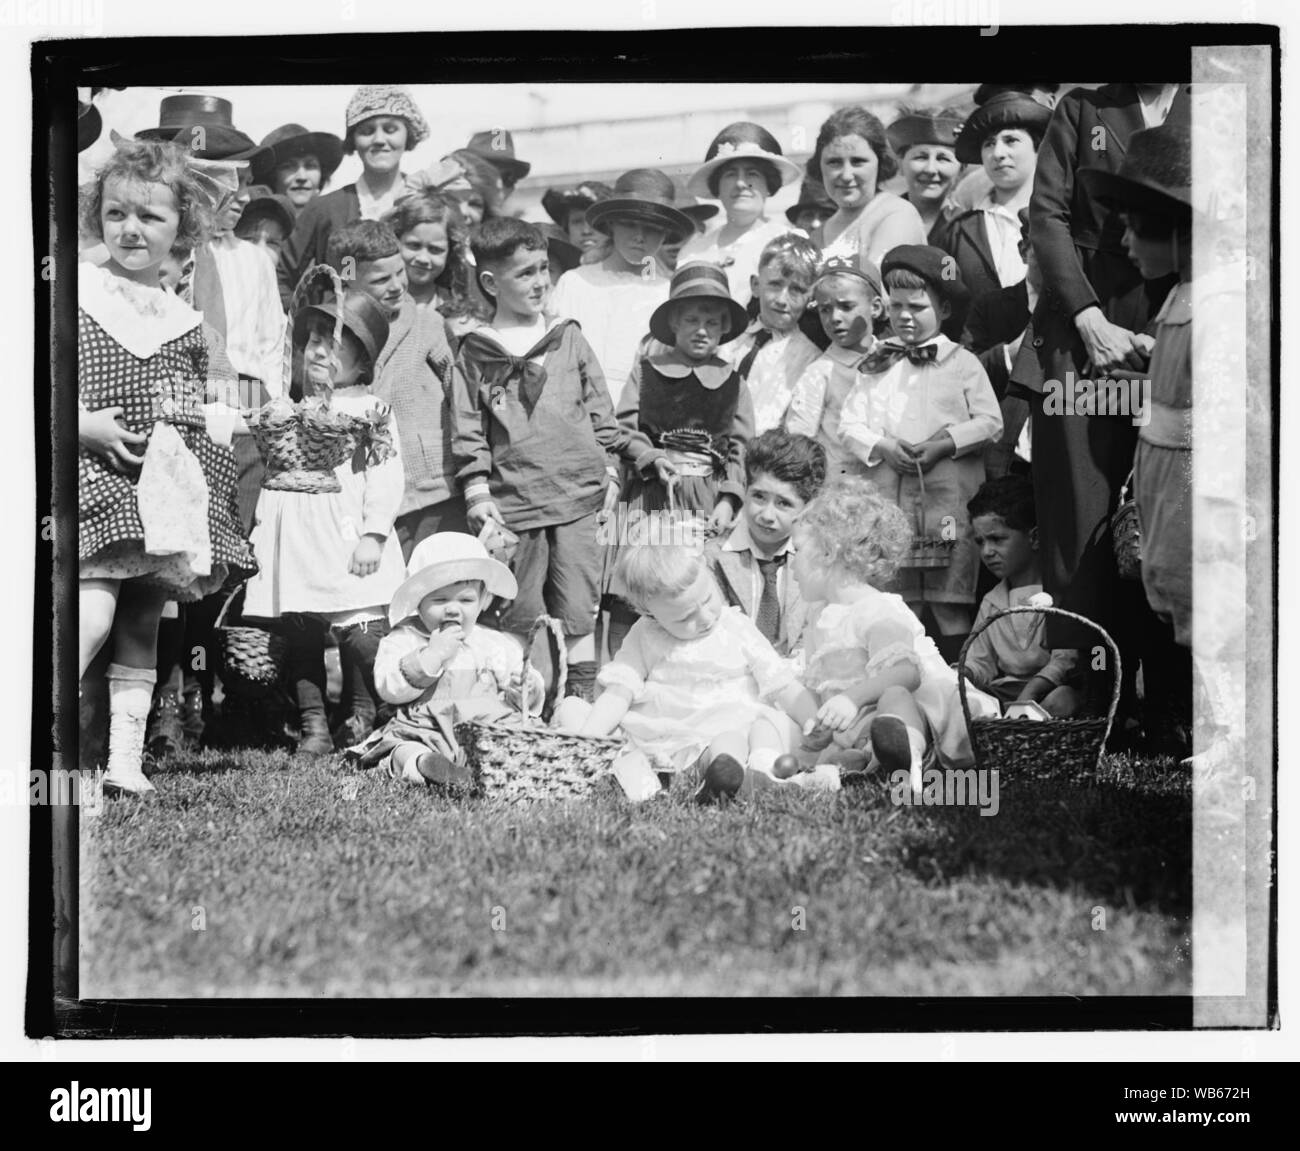 Easter egg rolling, 1921 Stock Photo - Alamy